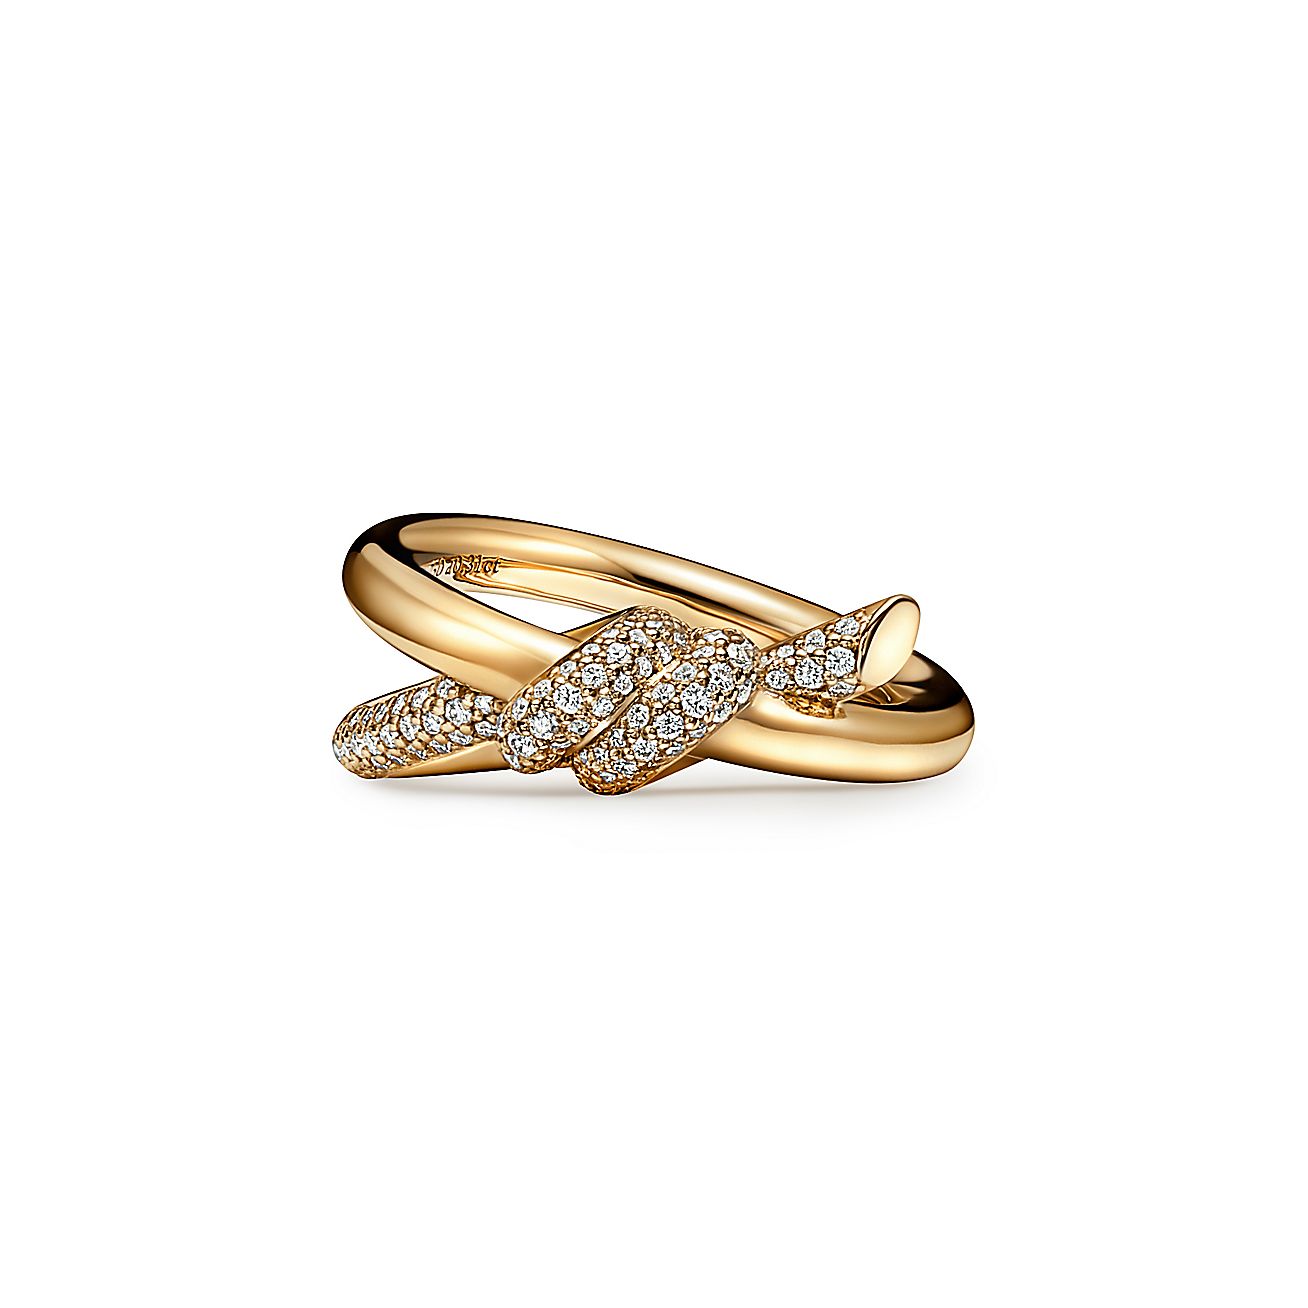 Tiffany Knot Double Row Ring in Yellow Gold with Diamonds, Size: 6